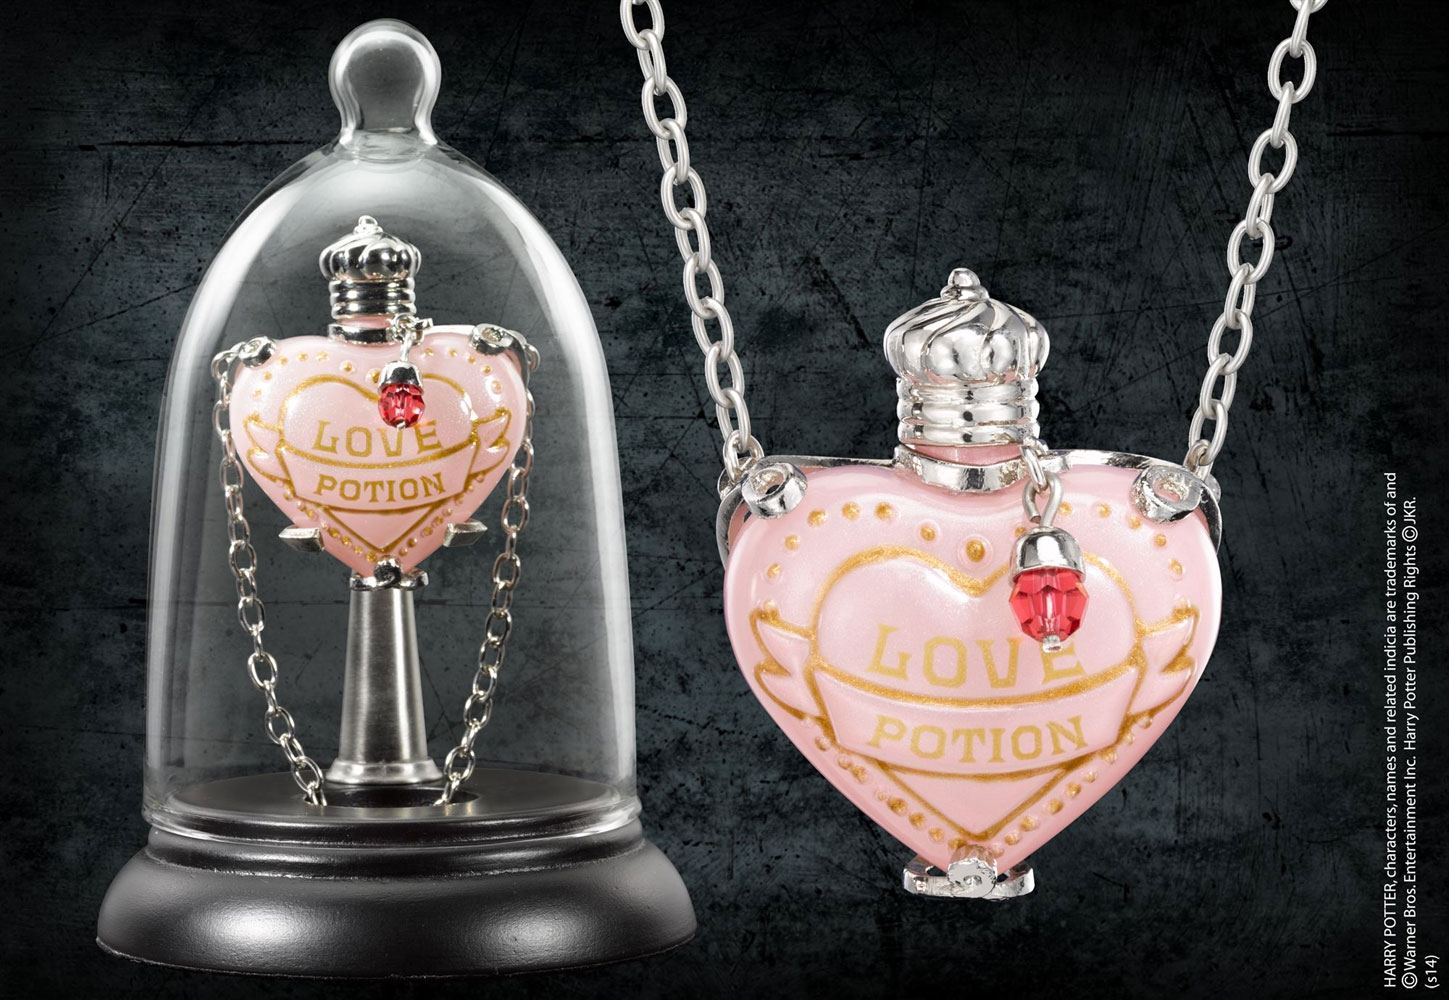 Harry Potter - Love Potion Pendant and Display